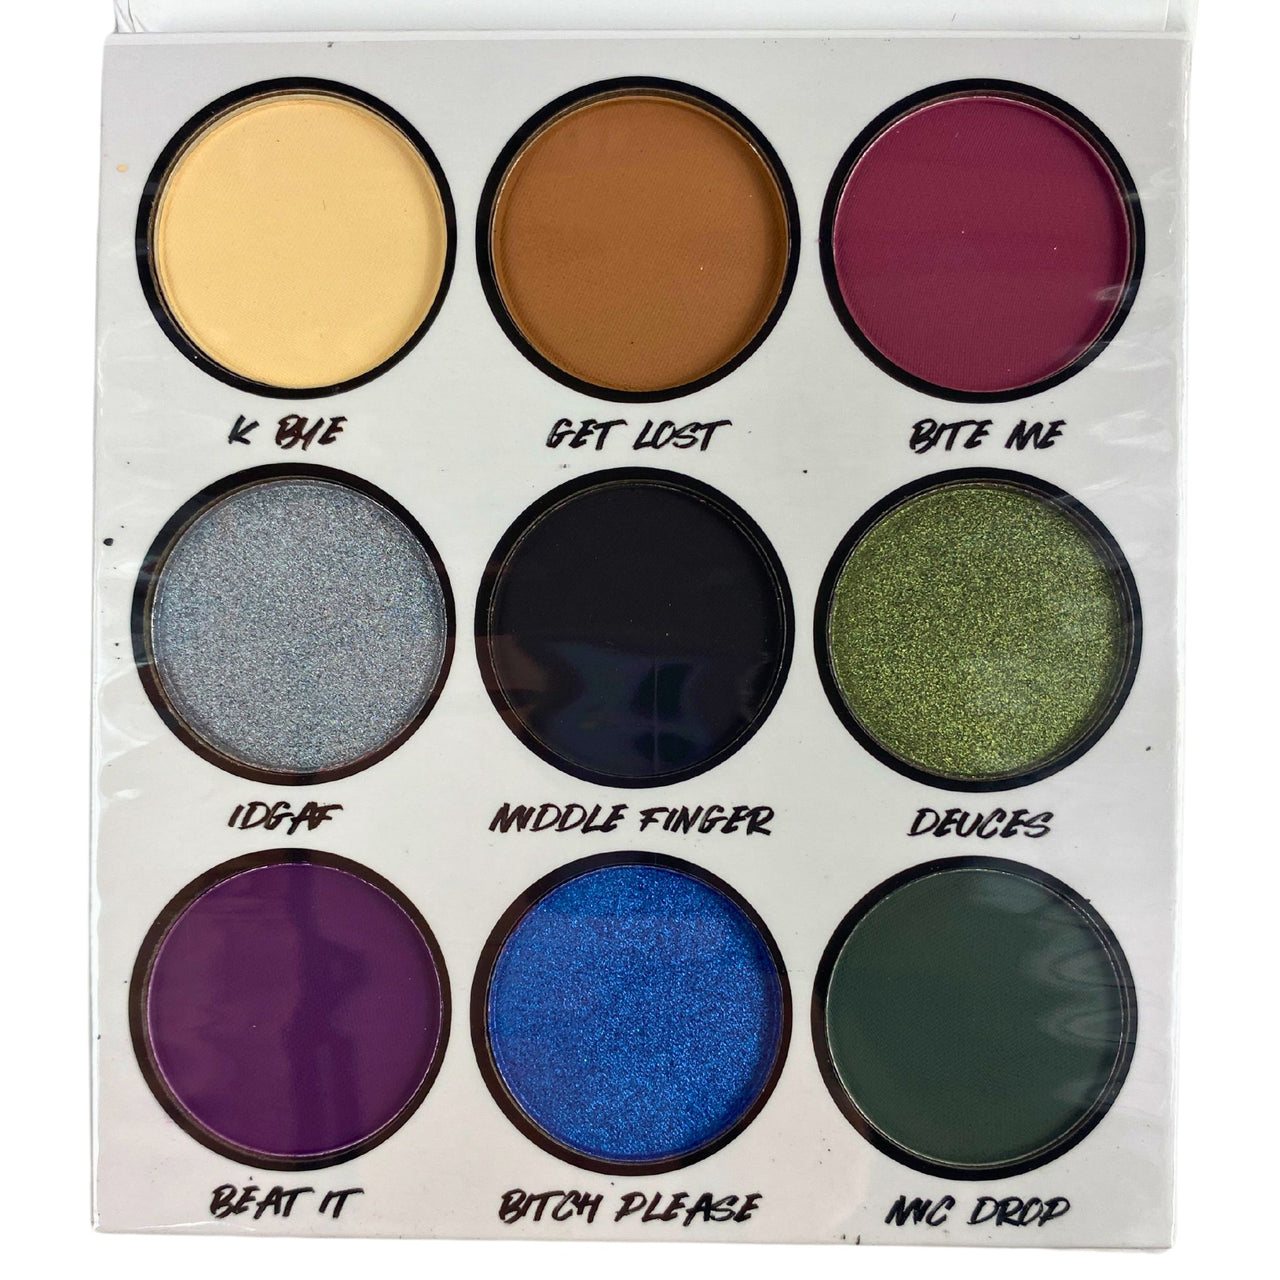 BH Cosmetics F*ck Off 9 color shadow palette 